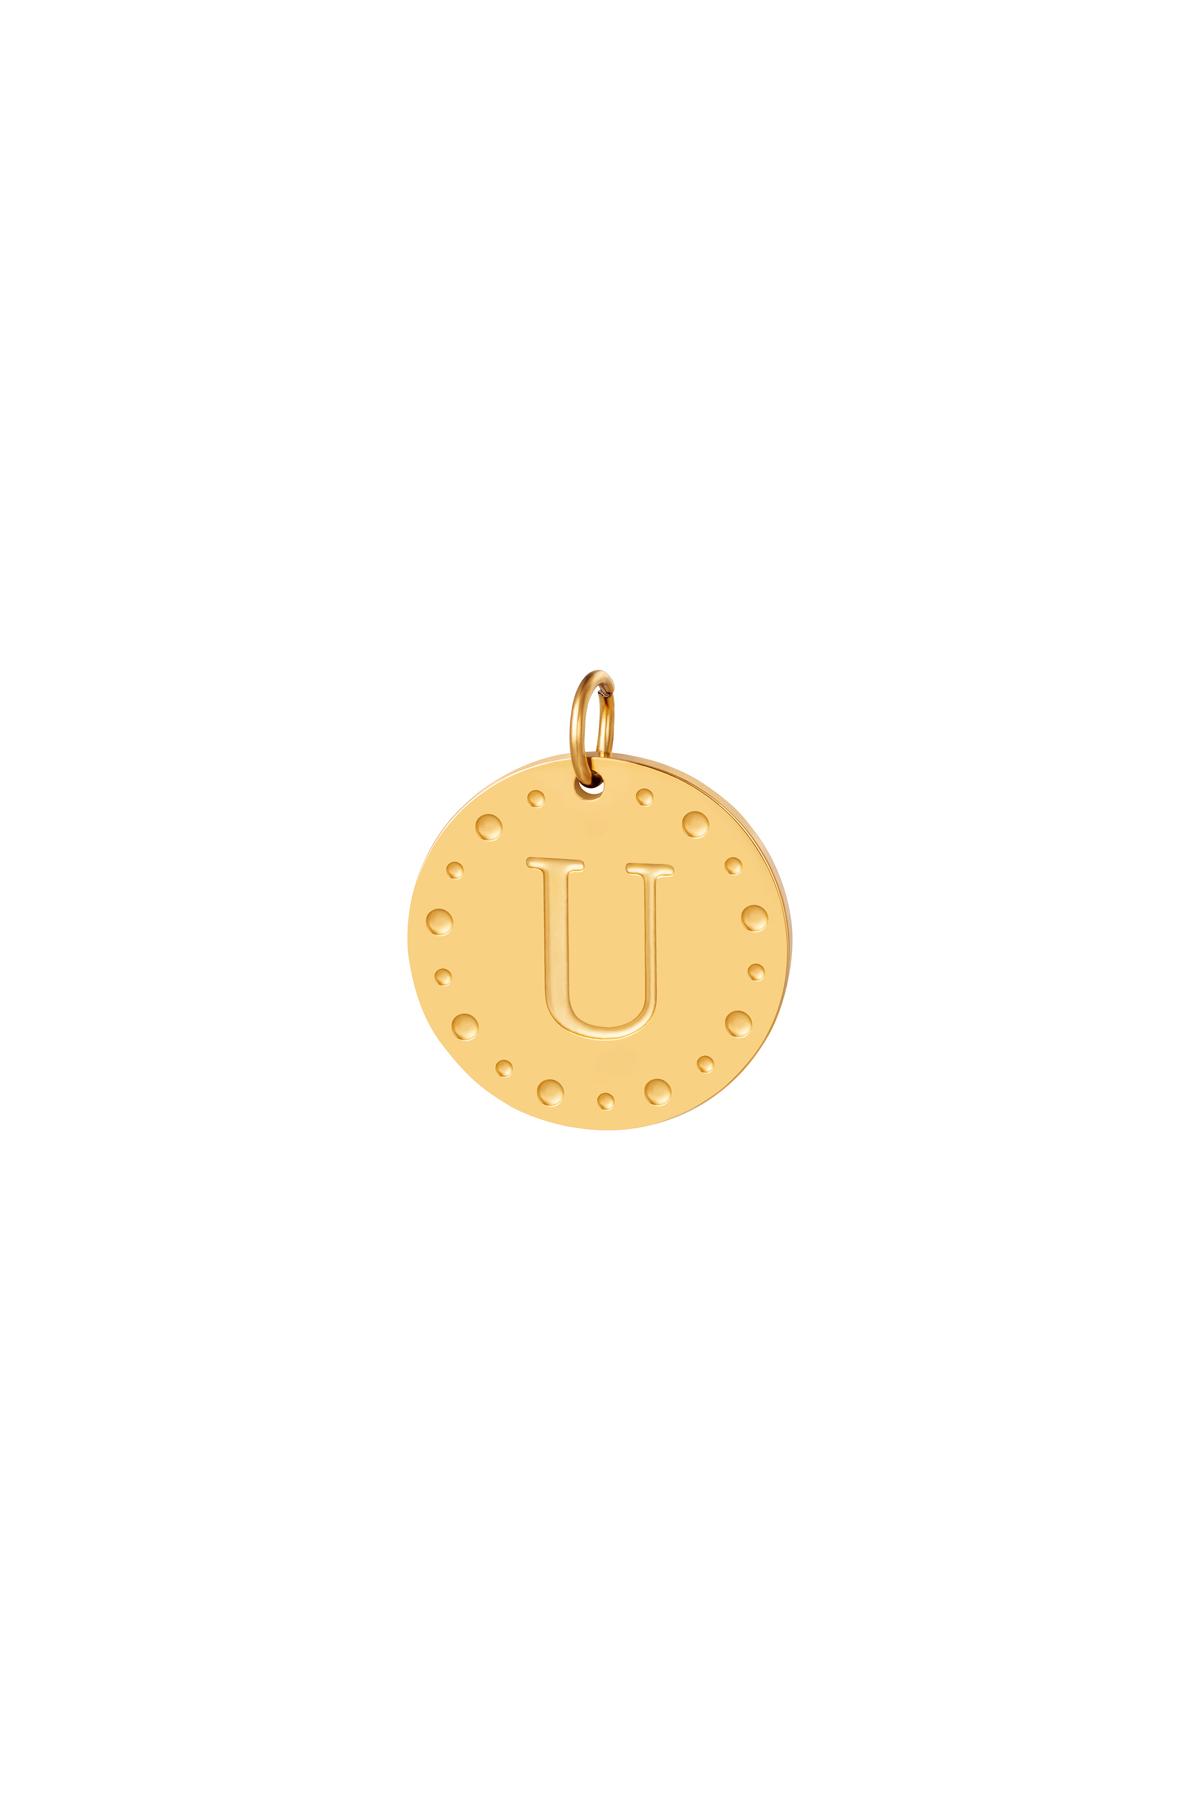 Gold / Circle charm initial U Gold Stainless Steel Picture11